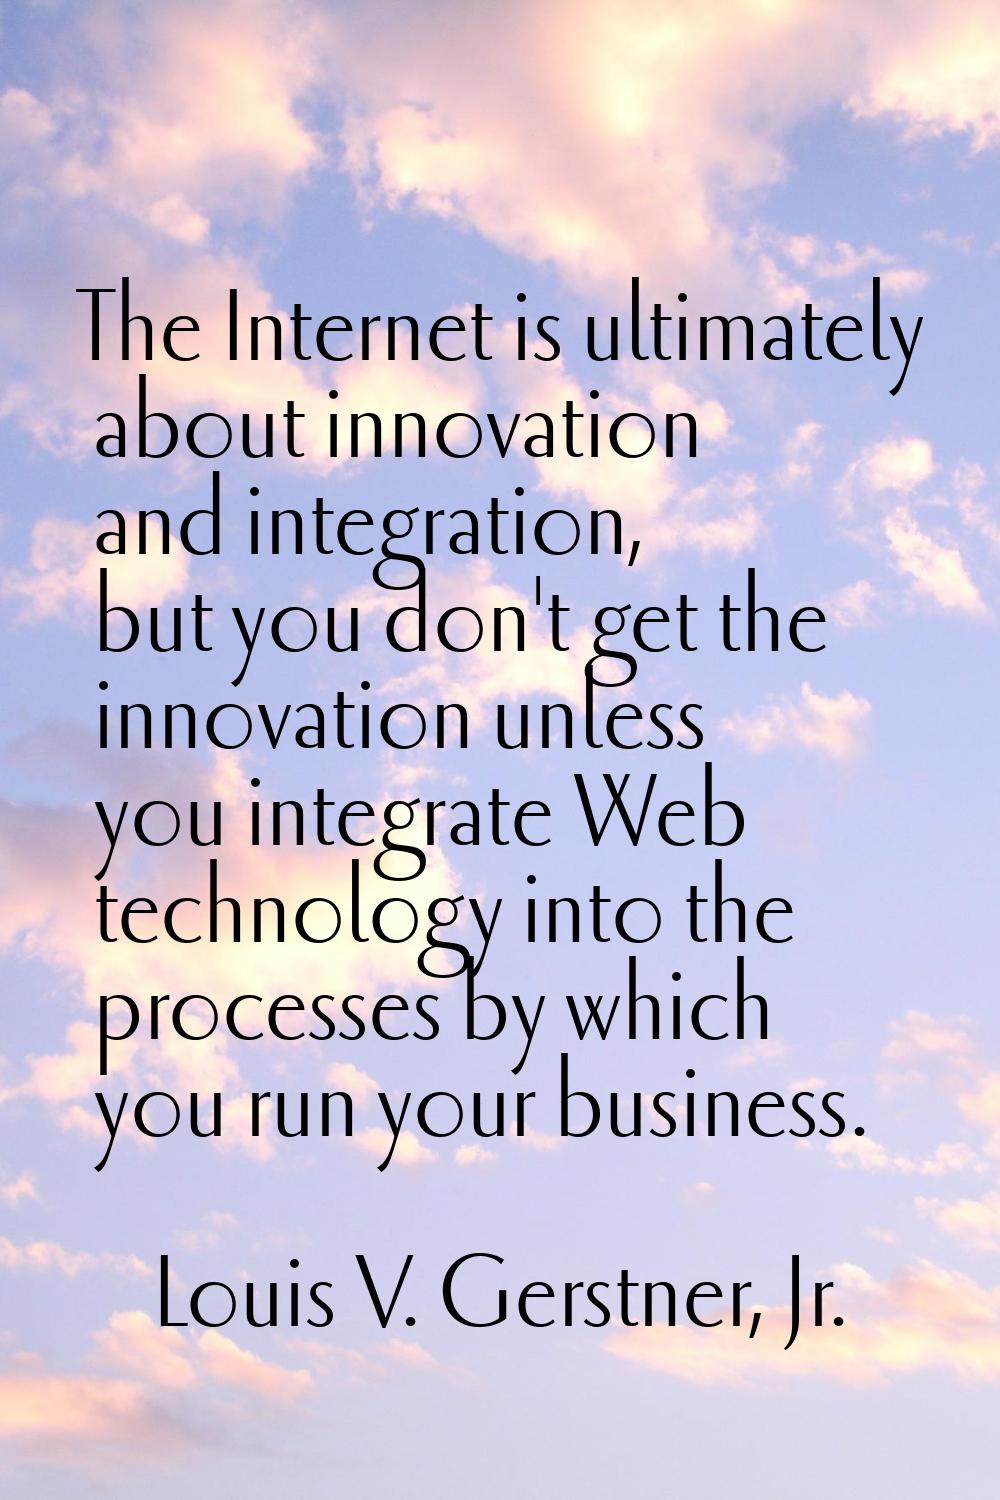 The Internet is ultimately about innovation and integration, but you don't get the innovation unles